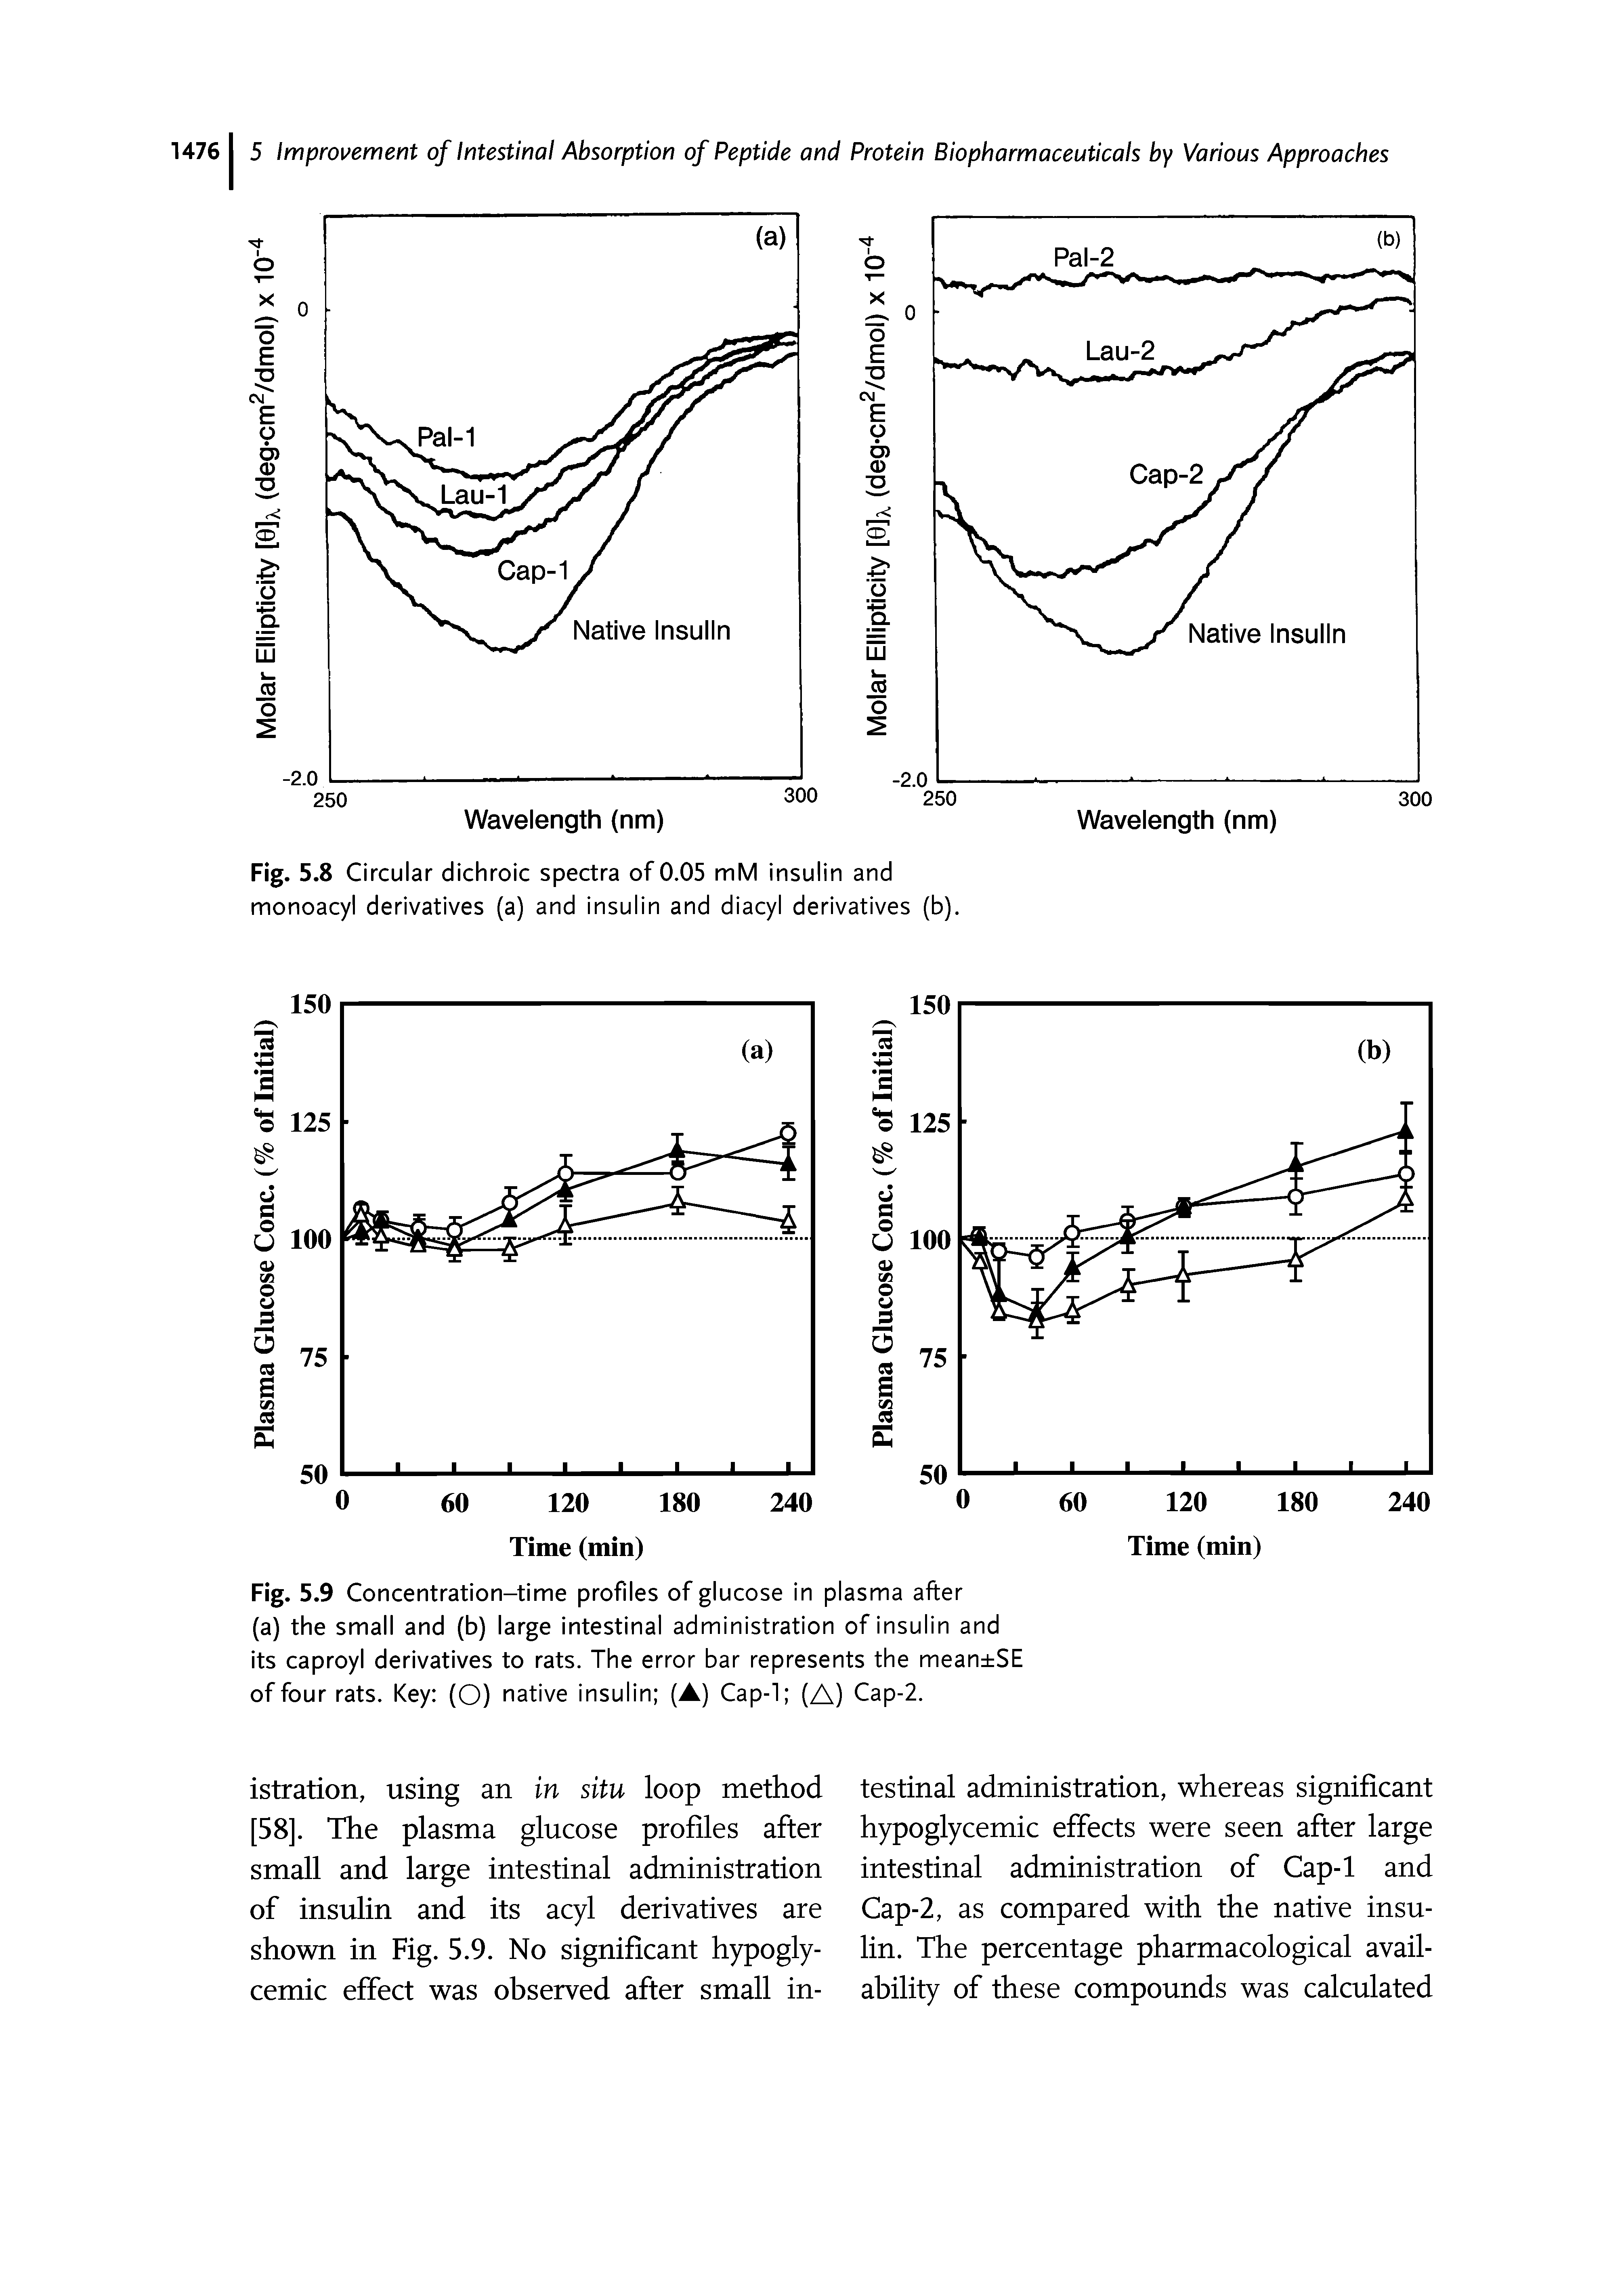 Fig. 5.9 Concentration-time profiles of glucose in plasma after (a) the small and (b) large intestinal administration of insulin and its caproyl derivatives to rats. The error bar represents the mean SE of four rats. Key (O) native insulin (A) Cap-1 (A) Cap-2.